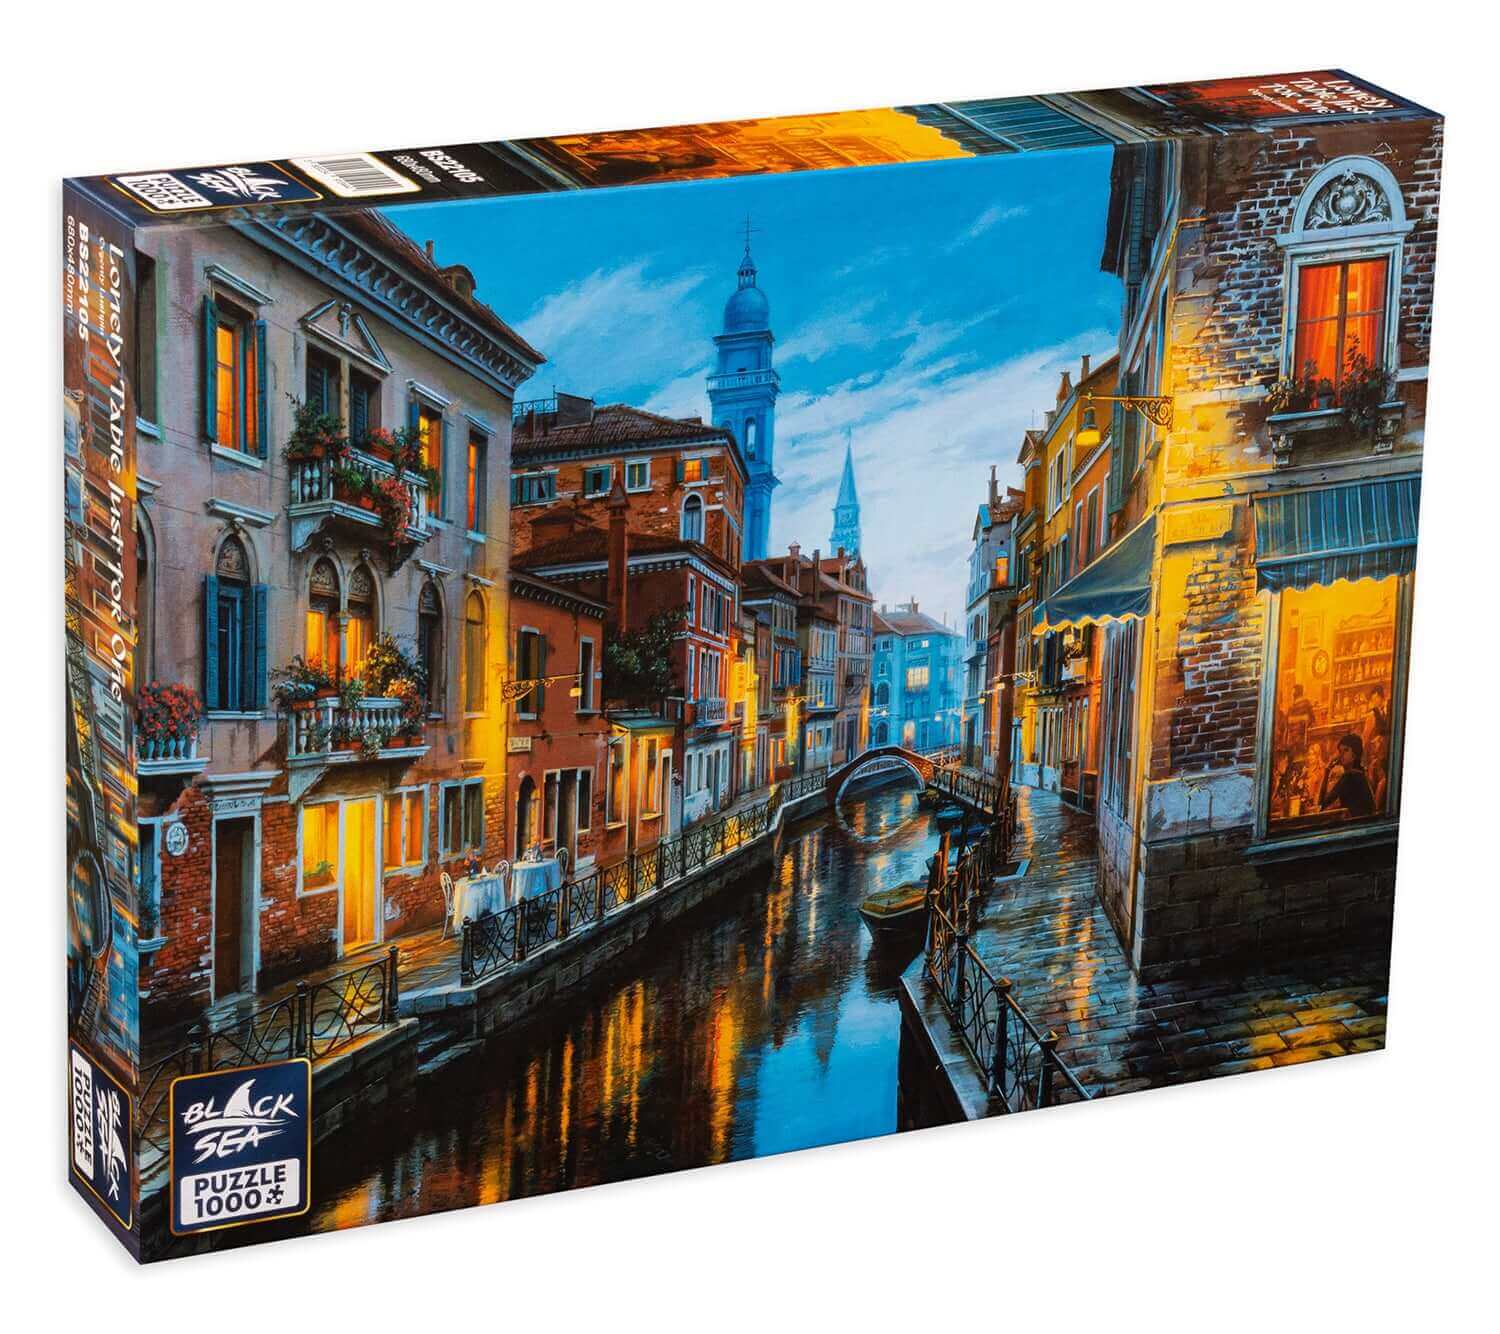 Puzzle Black Sea 1000 pieces - A table for one, The evening had just begun, and the nice little streets glowed gently under the soft light of the streetlamps. She was tired of the long day, so she went in the first café she saw. She ordered a cappuccino,